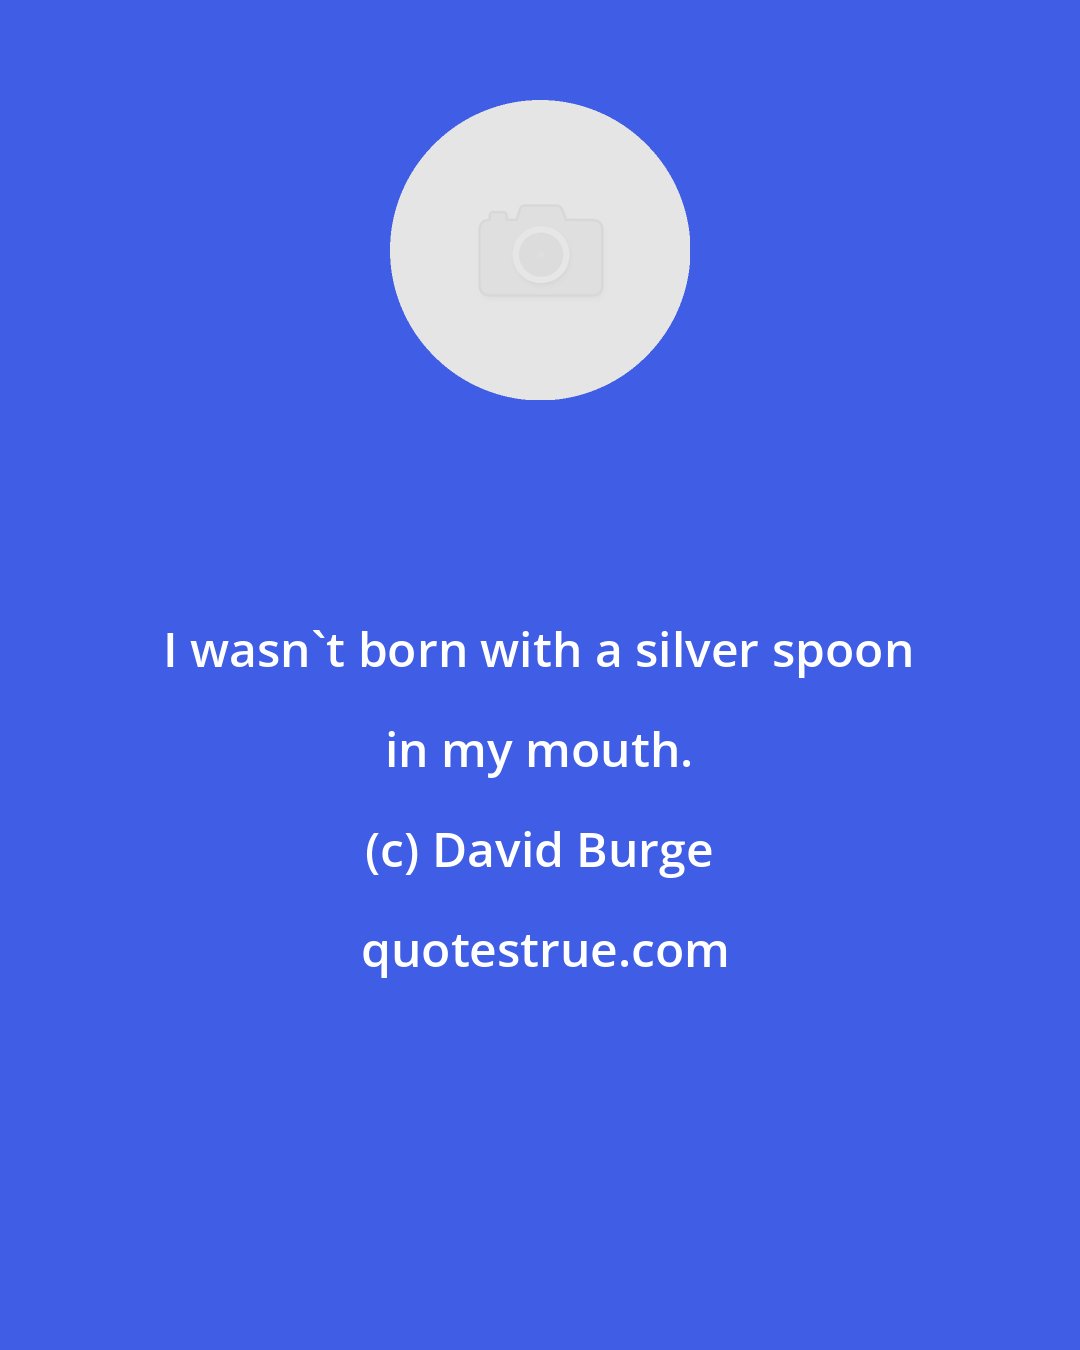 David Burge: I wasn't born with a silver spoon in my mouth.